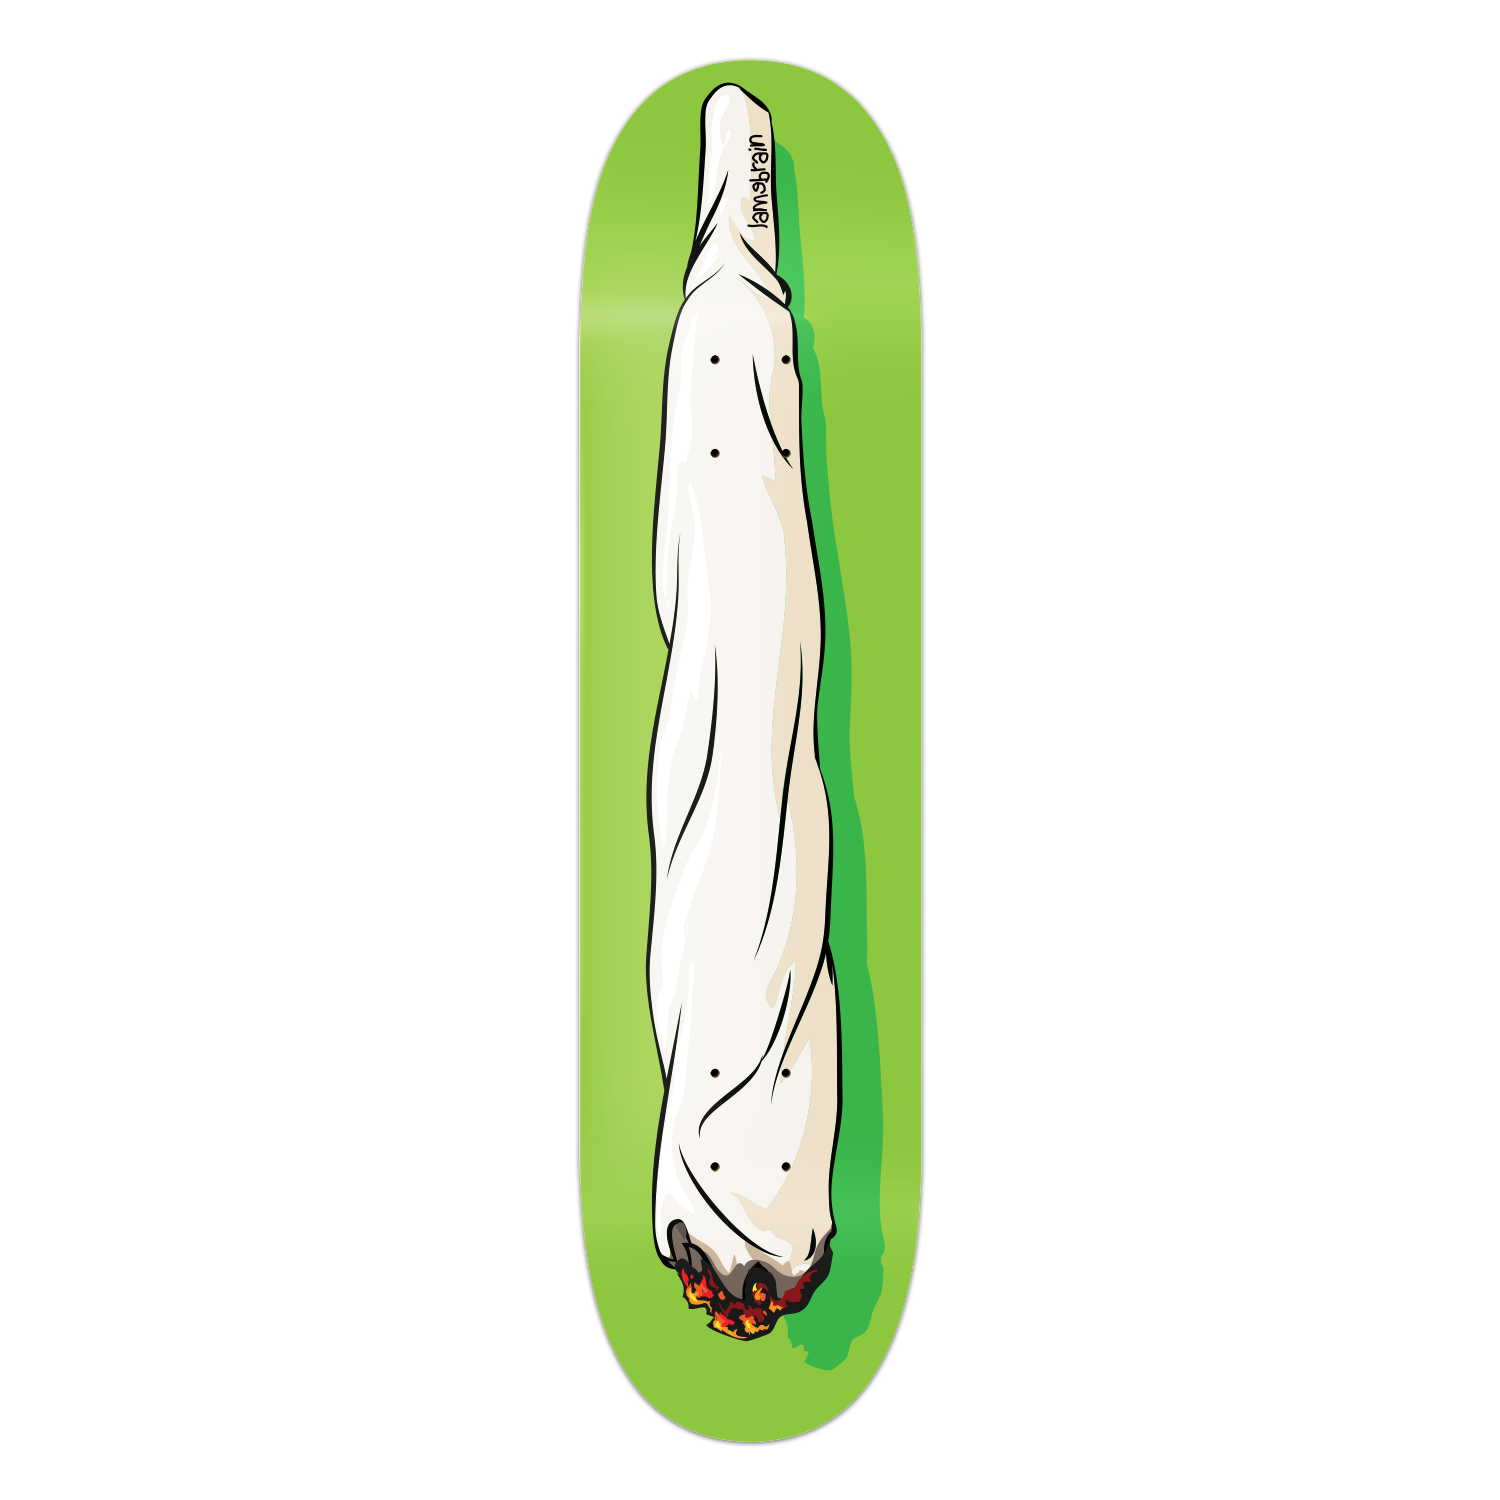 green skateboard with a big joint on bottom